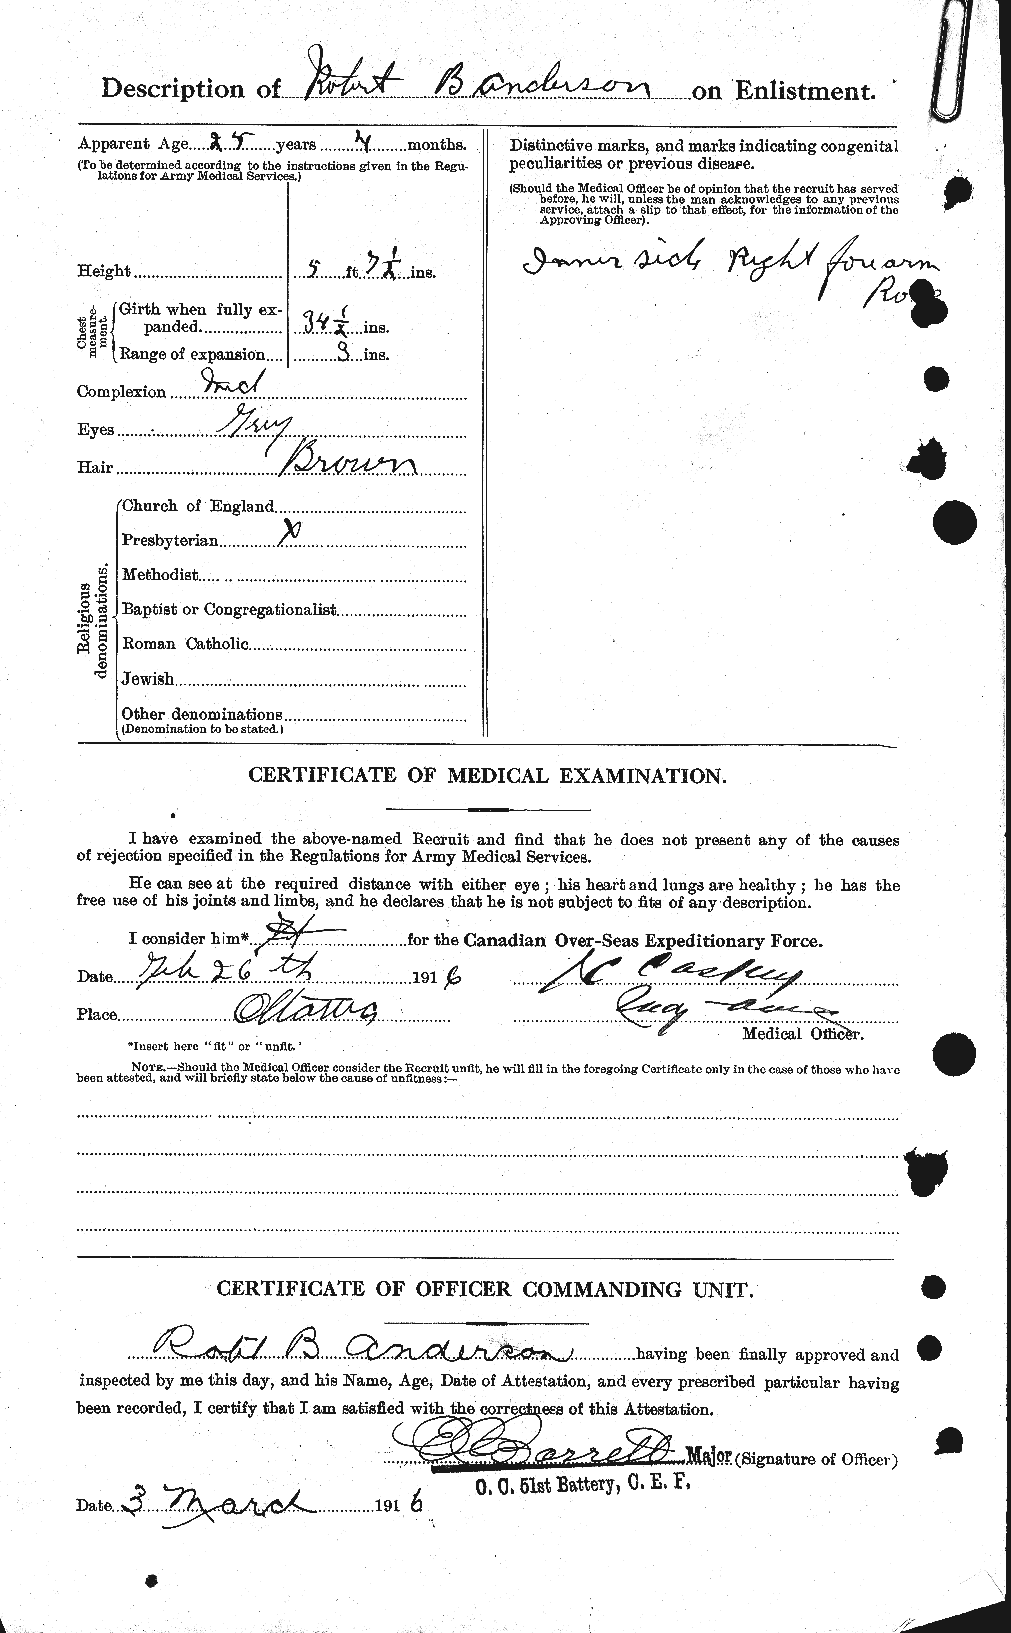 Personnel Records of the First World War - CEF 207269b